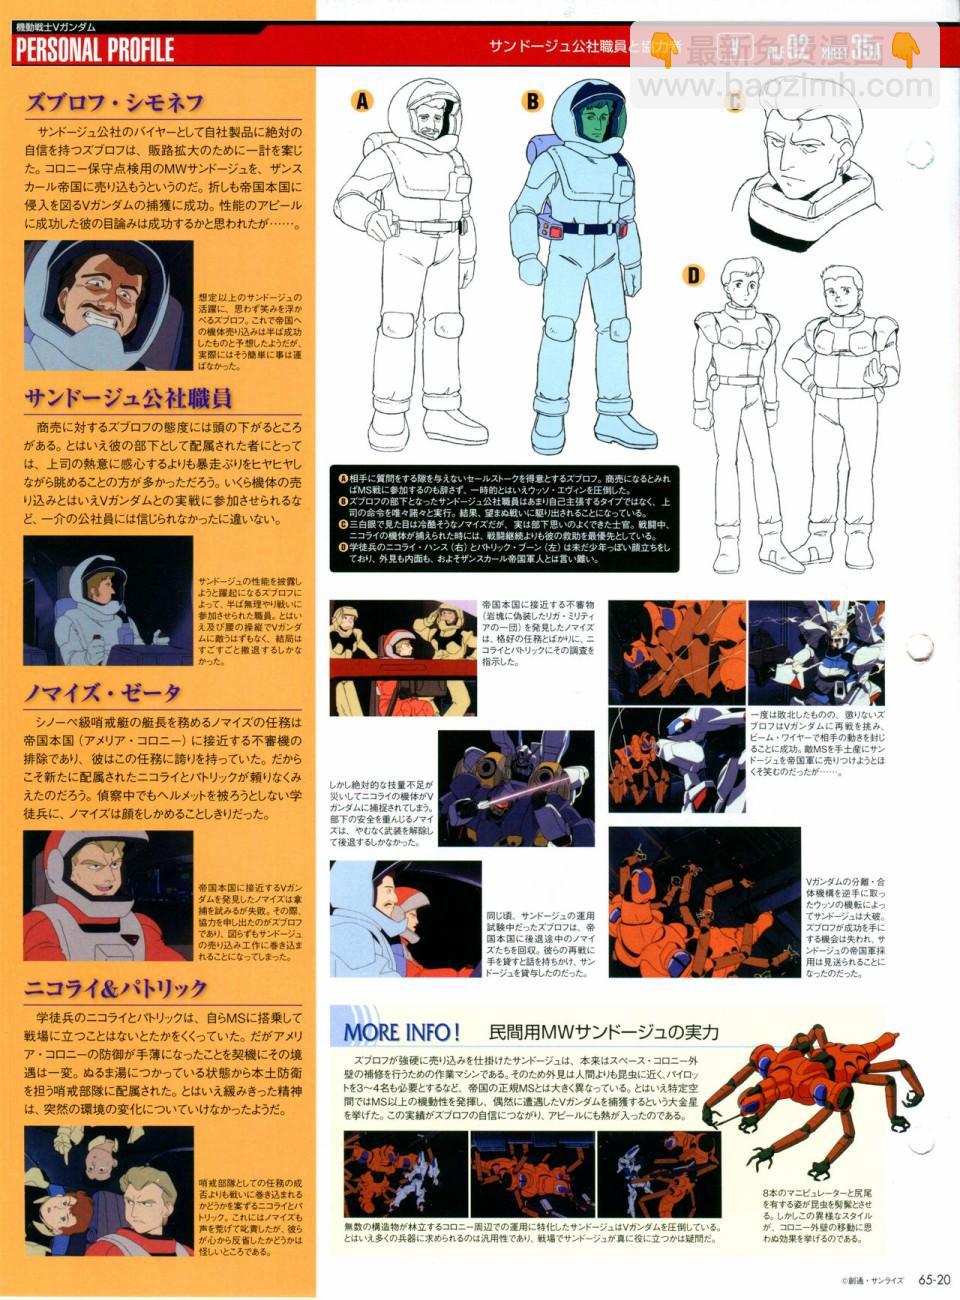 The Official Gundam Perfect File  - 第65-67話(1/3) - 8